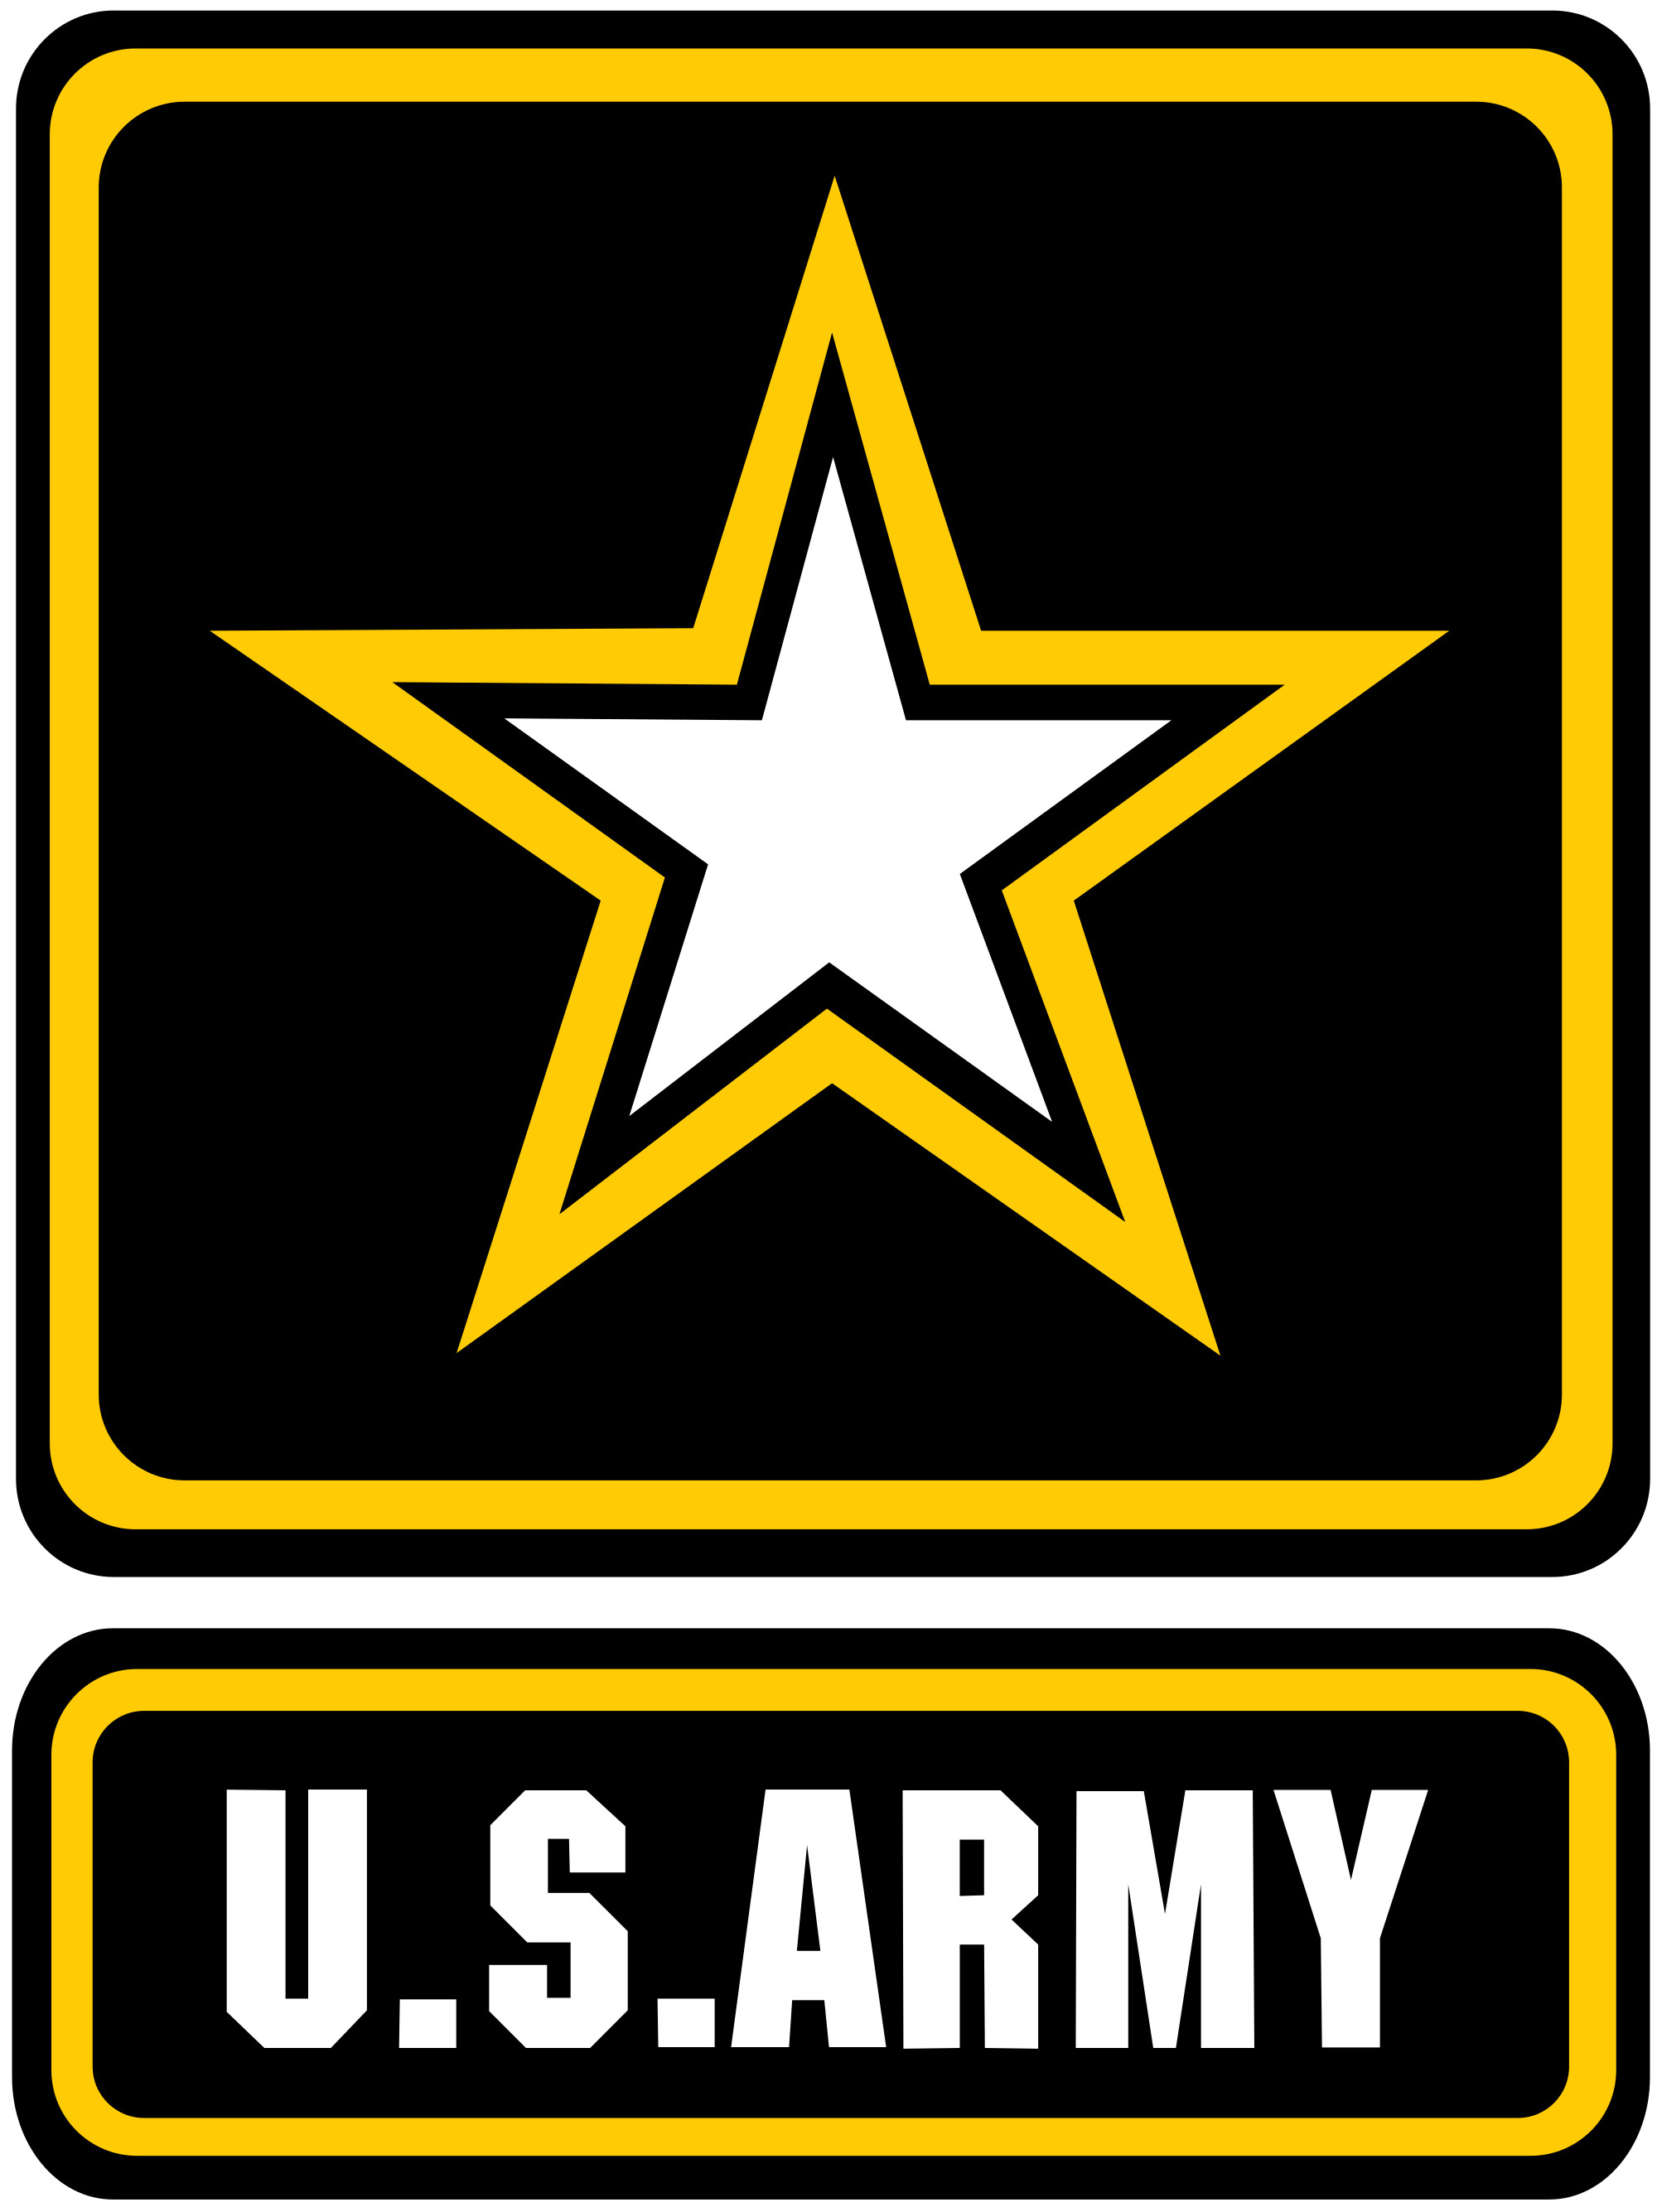 US Army Logo Wallpaper (58+ images)